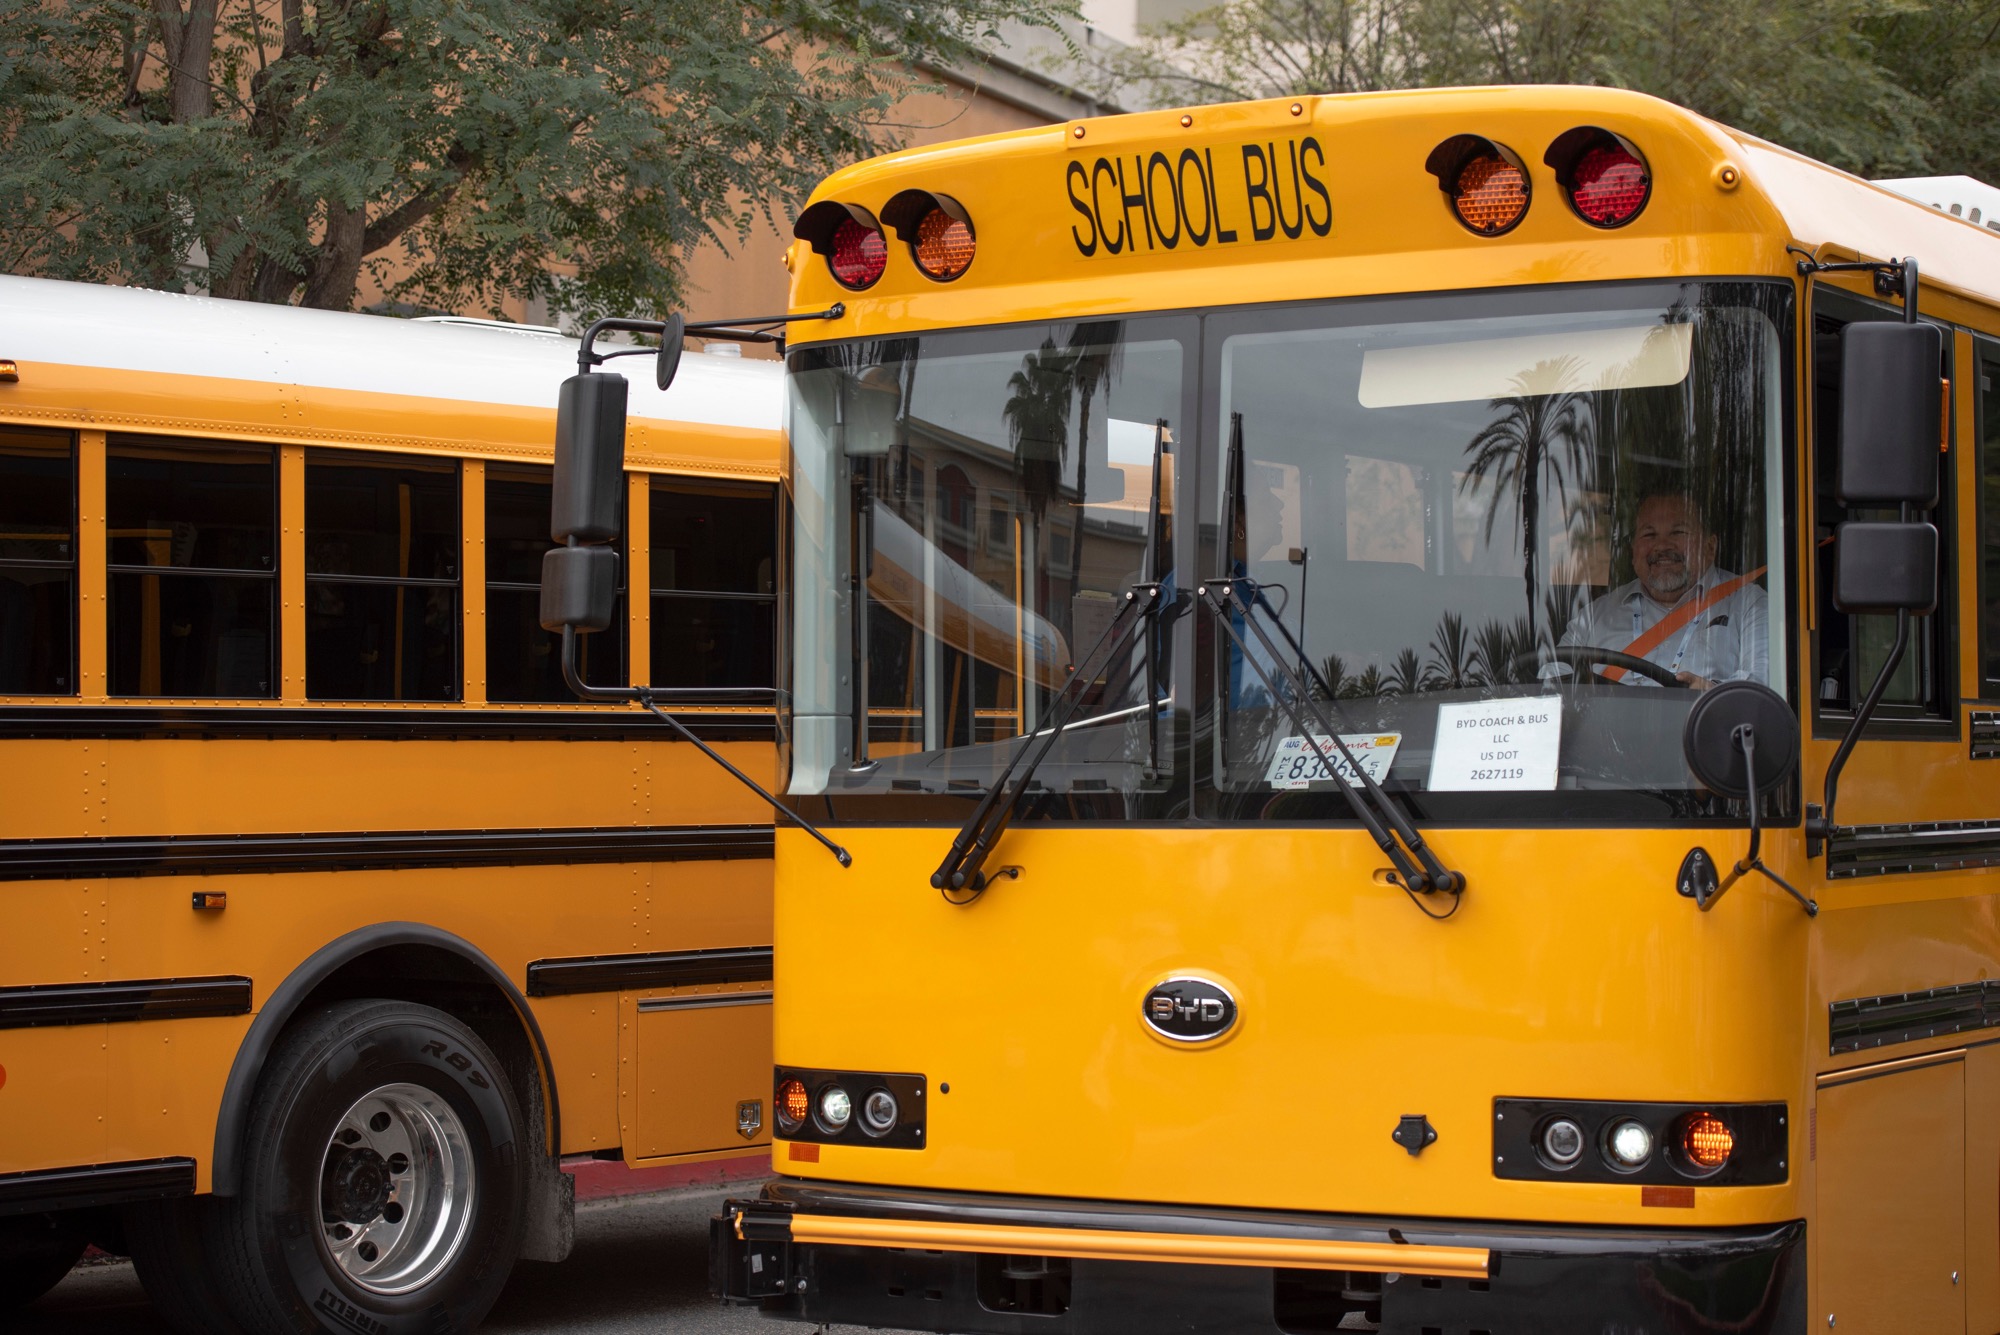 Photograph of a young student next to a school bus